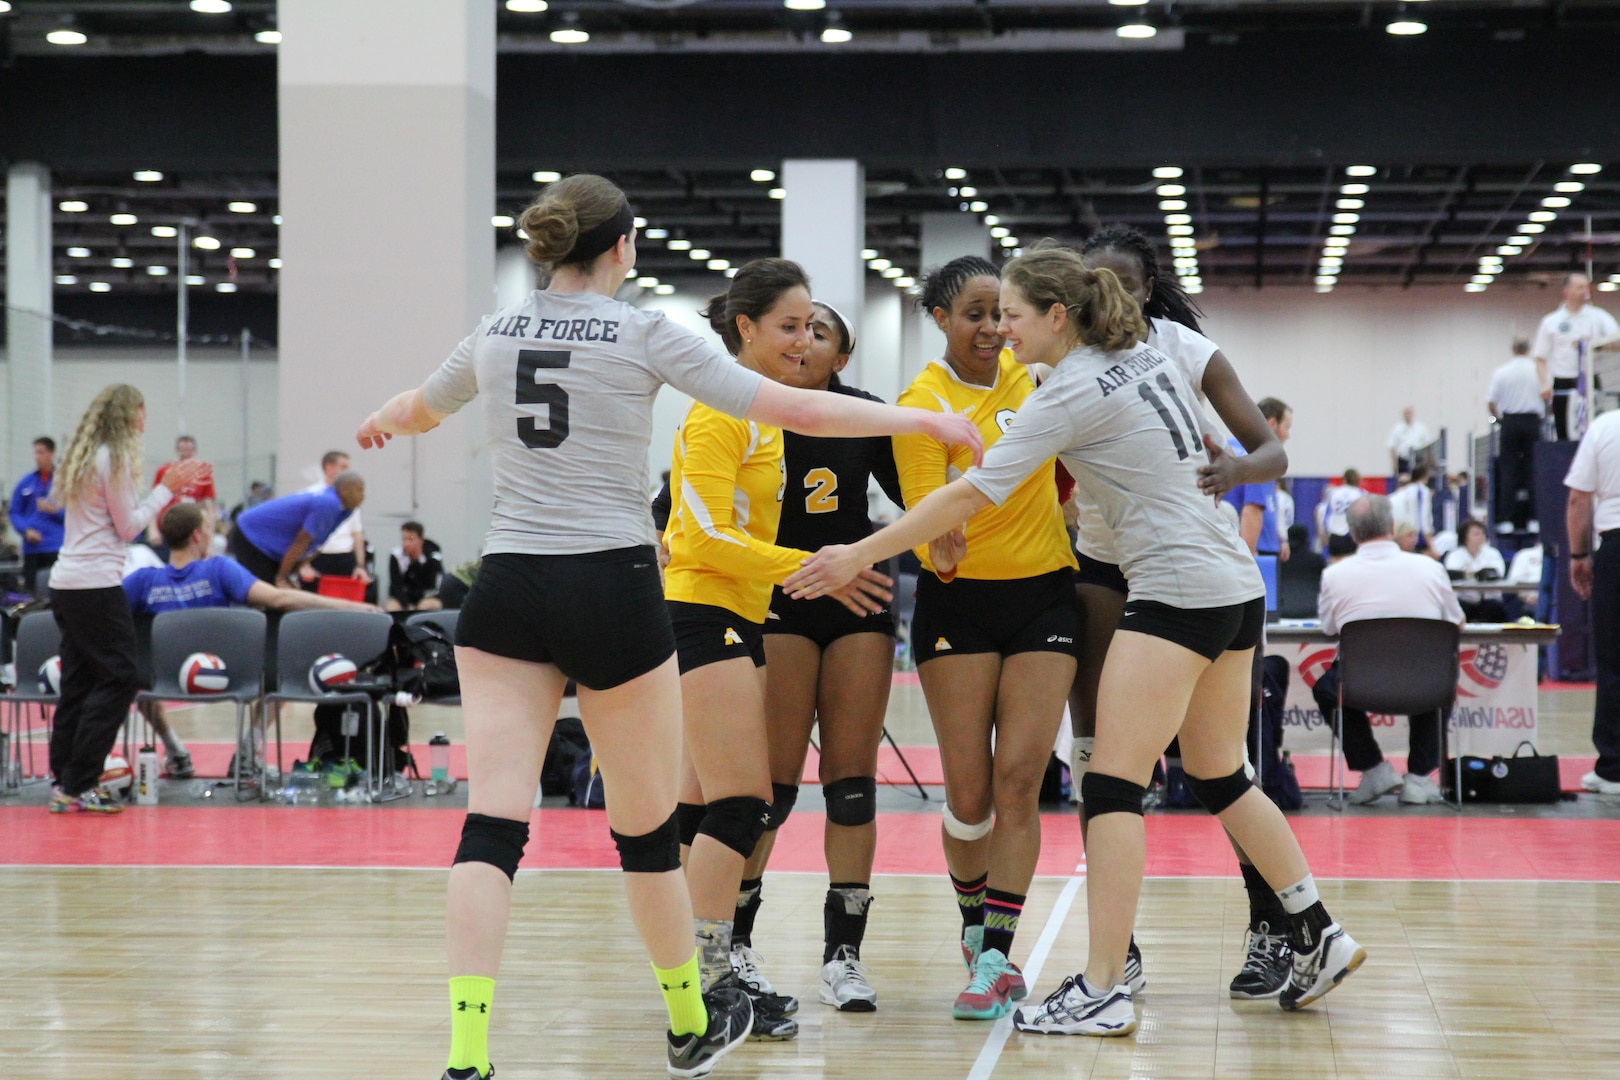 Members of the Army, Navy and Air Force women's volleyball team come together as an Armed Forces All-Star team as they faced Team Canada during friendly international Conseil International du Sport Militaire (CISM) exhibition match during the 2015 Armed Forces Volleyball Championship held in conjunction with the USA Volleyball National Championship at the COBO Center in Detroit, Mich. 22-24.  USA defeated Canada 2-1.